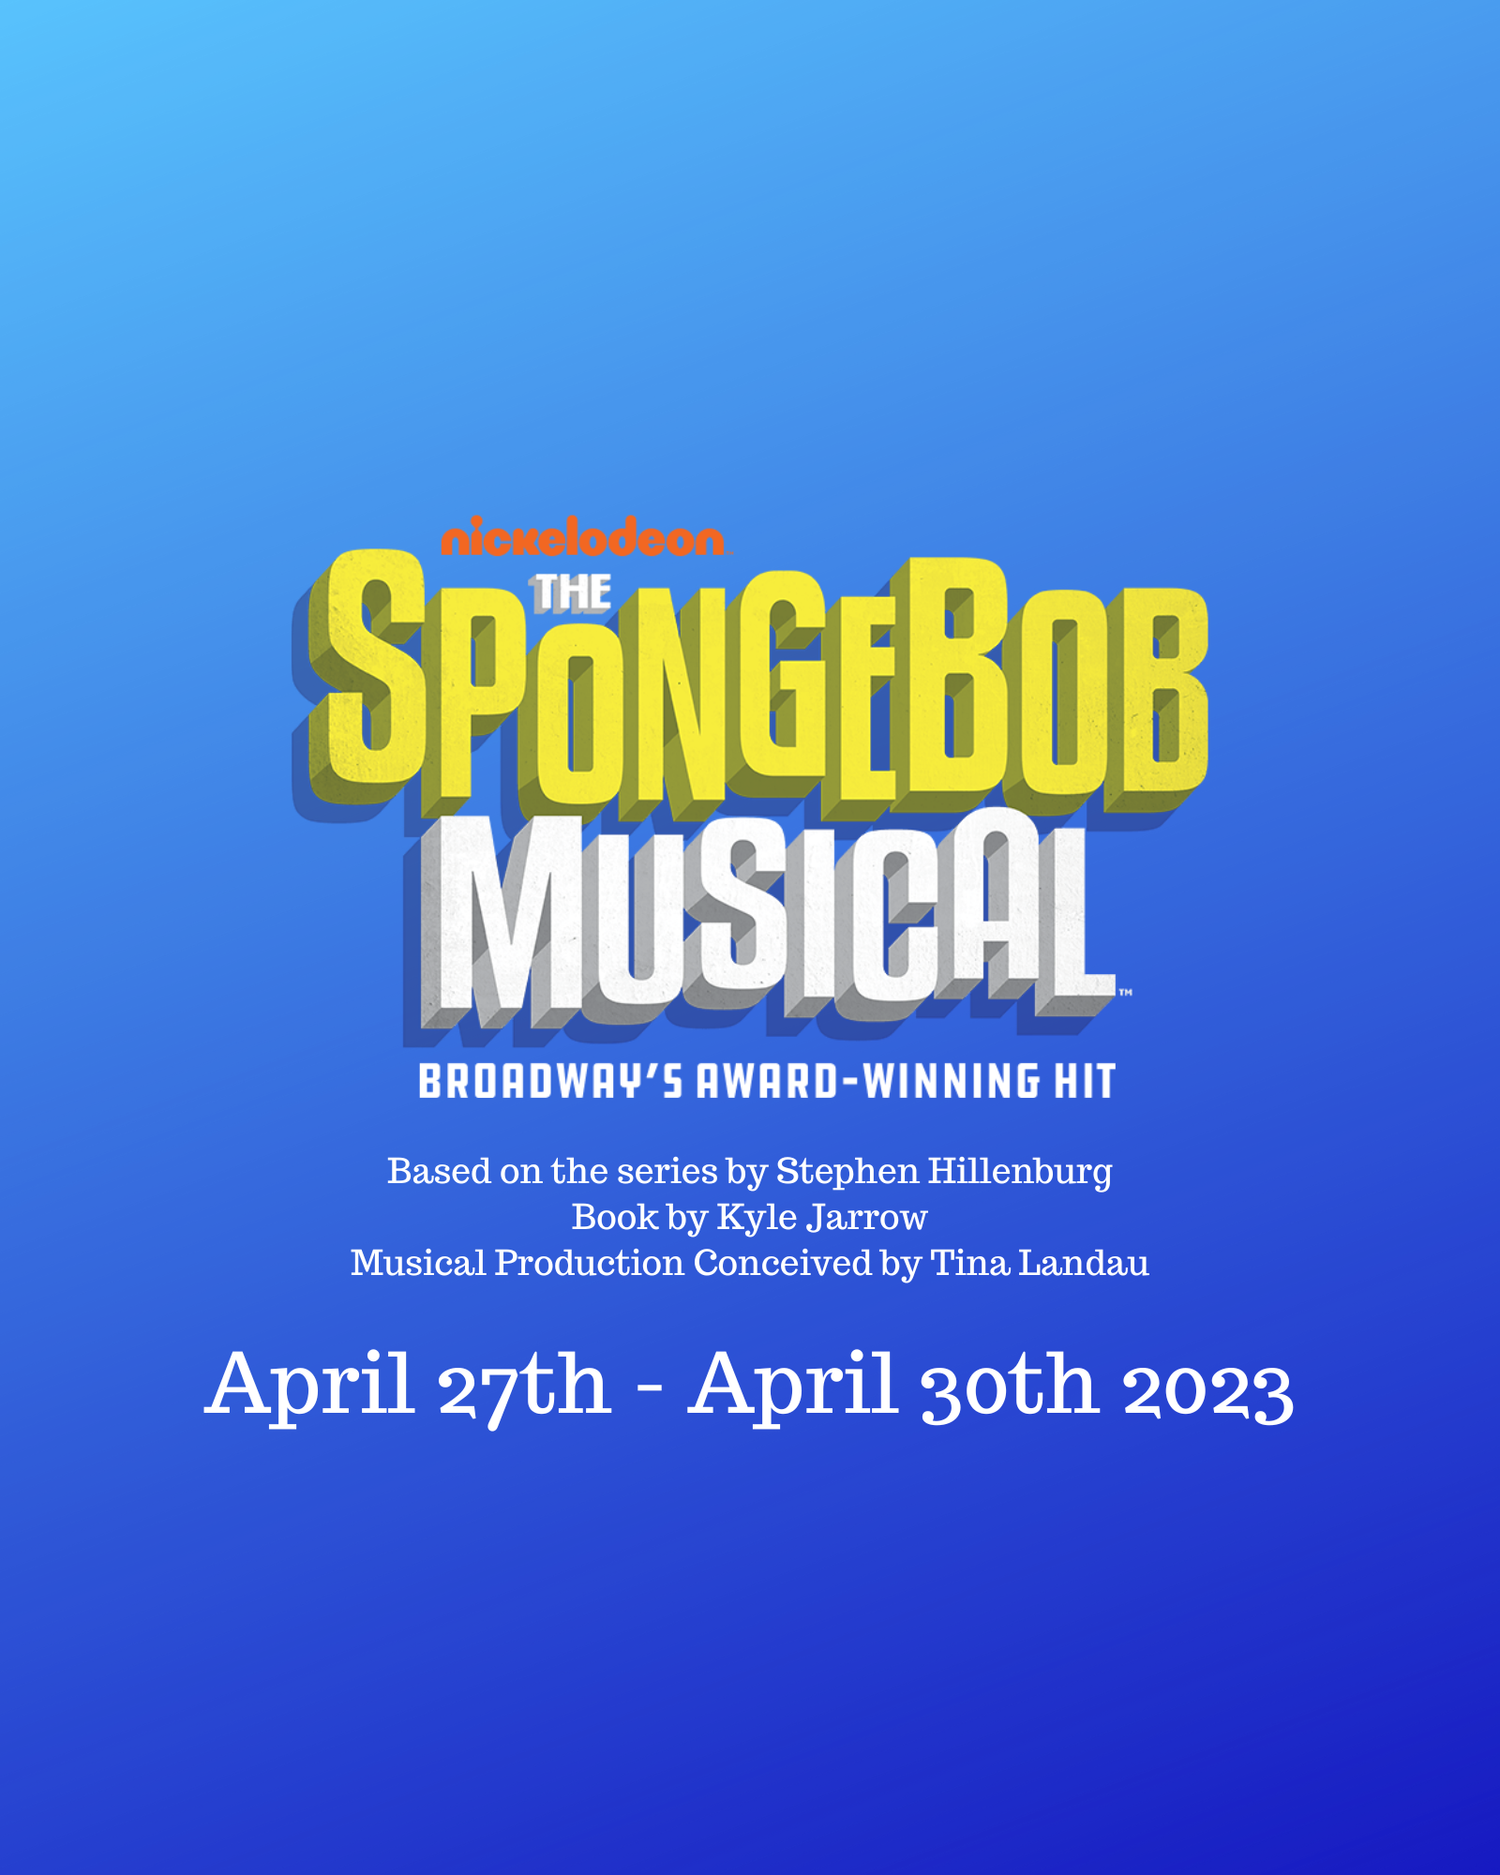 A blue background. Text reads: "nickelodean The Spongebob Musical Broadway's award-winning hit Based on the series by Stephen Hillenburg Book by Kyle Jarrow Musical Production Conceived by Tina Landau April 27th - April 30th 2023"